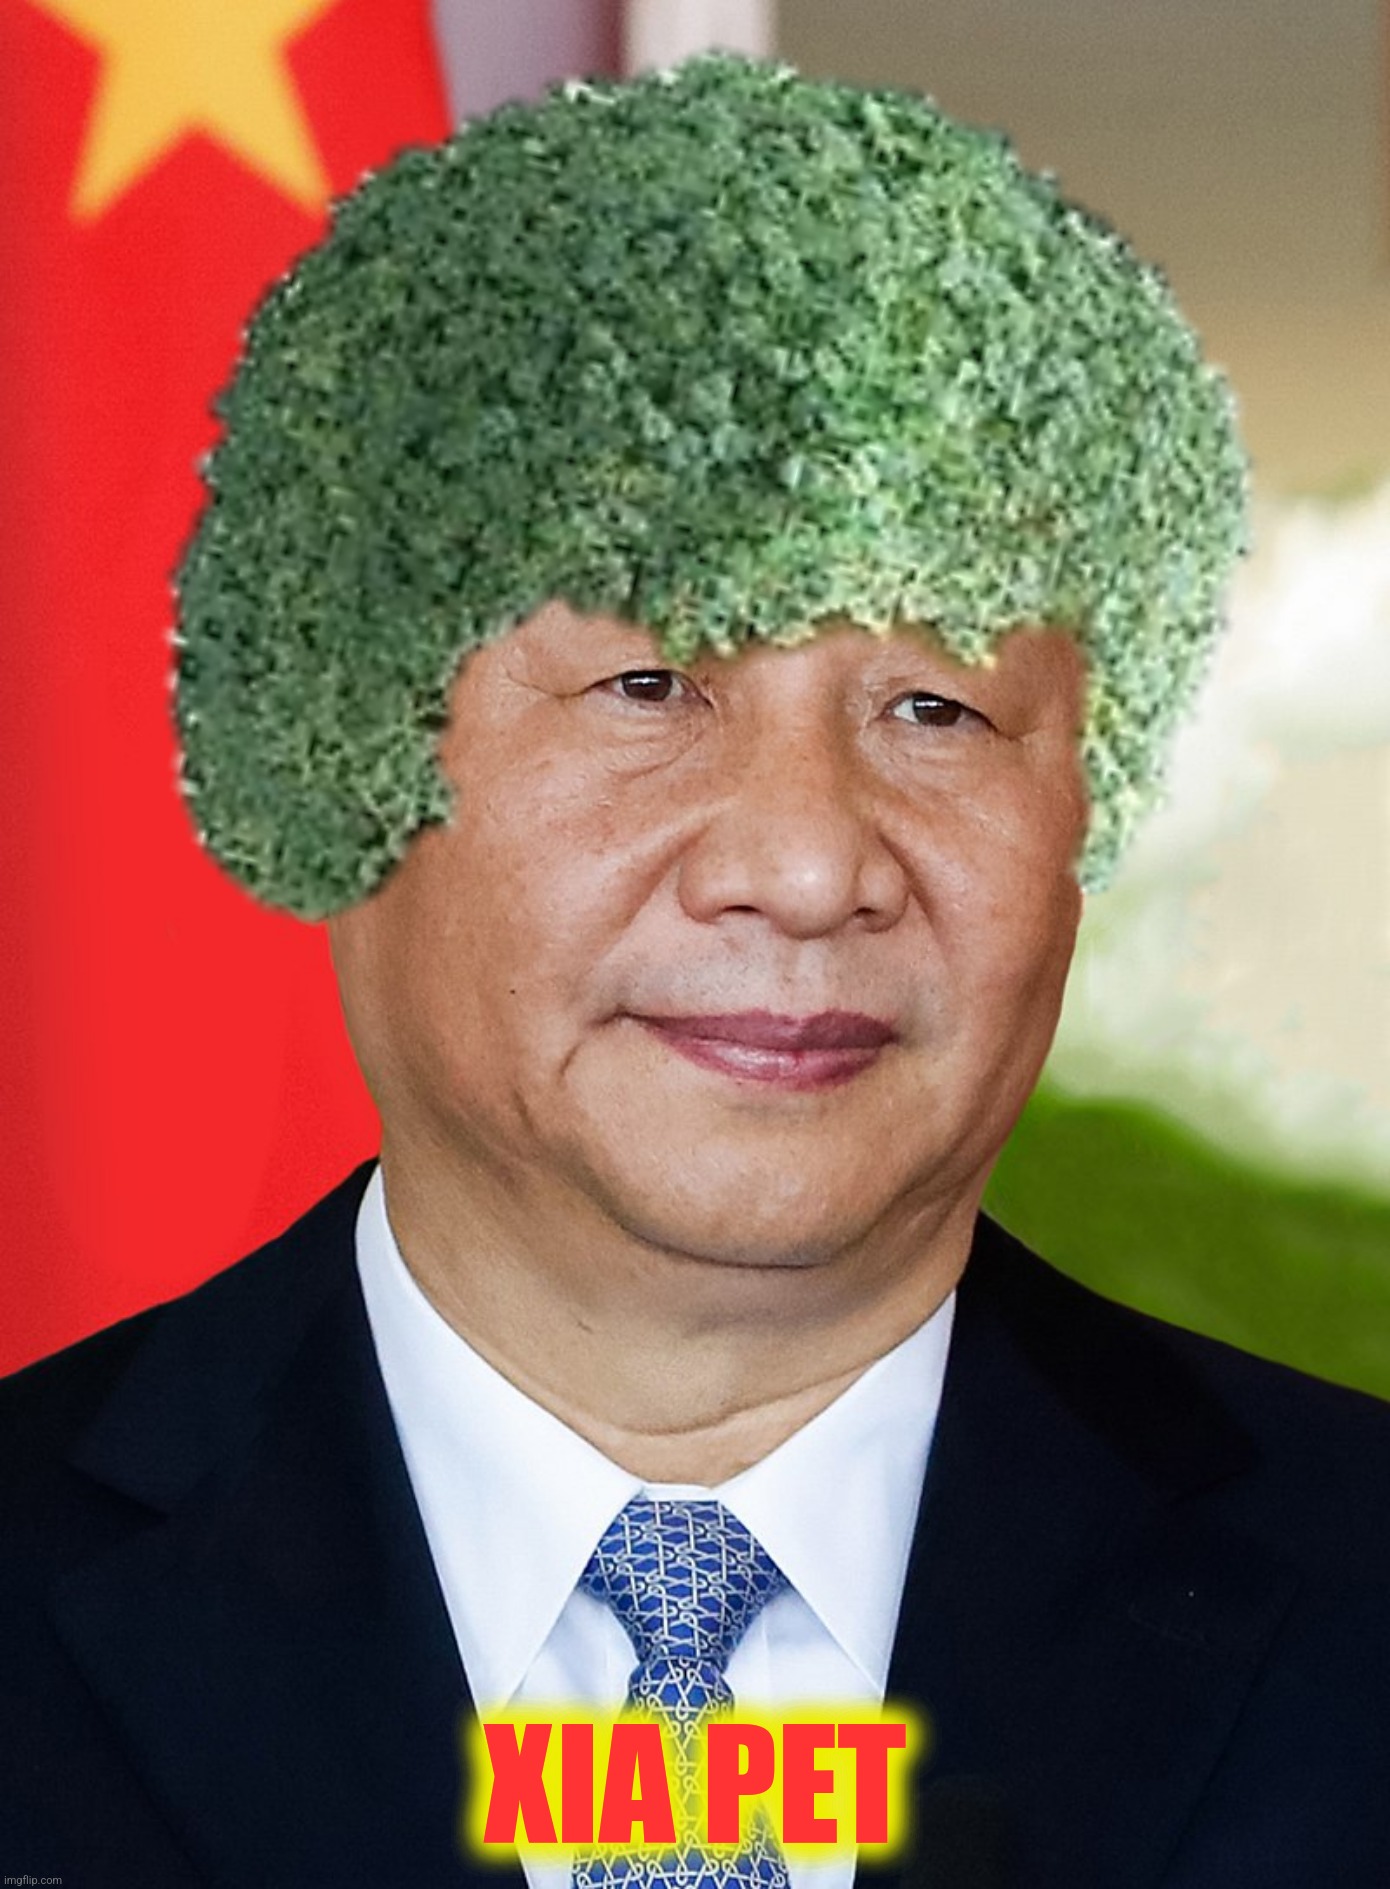 With Ukrainian agriculture devastated China introduces Plan B | XIA PET | image tagged in bad photoshop,chia pet,agriculture | made w/ Imgflip meme maker